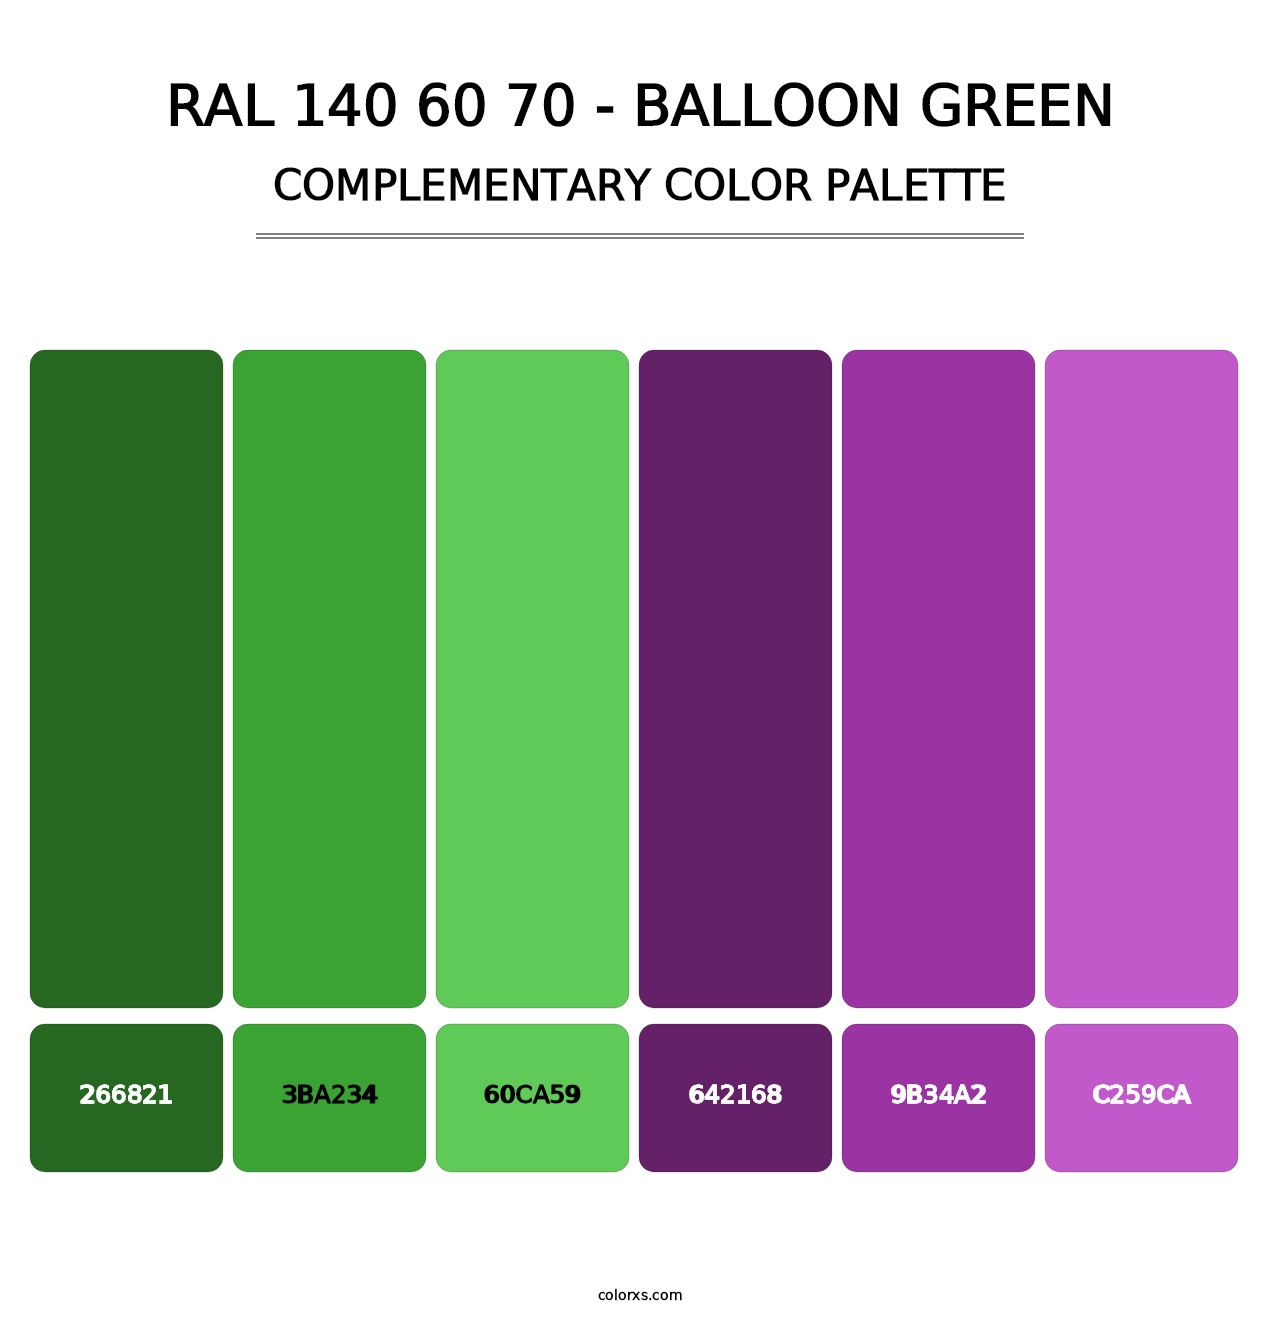 RAL 140 60 70 - Balloon Green - Complementary Color Palette